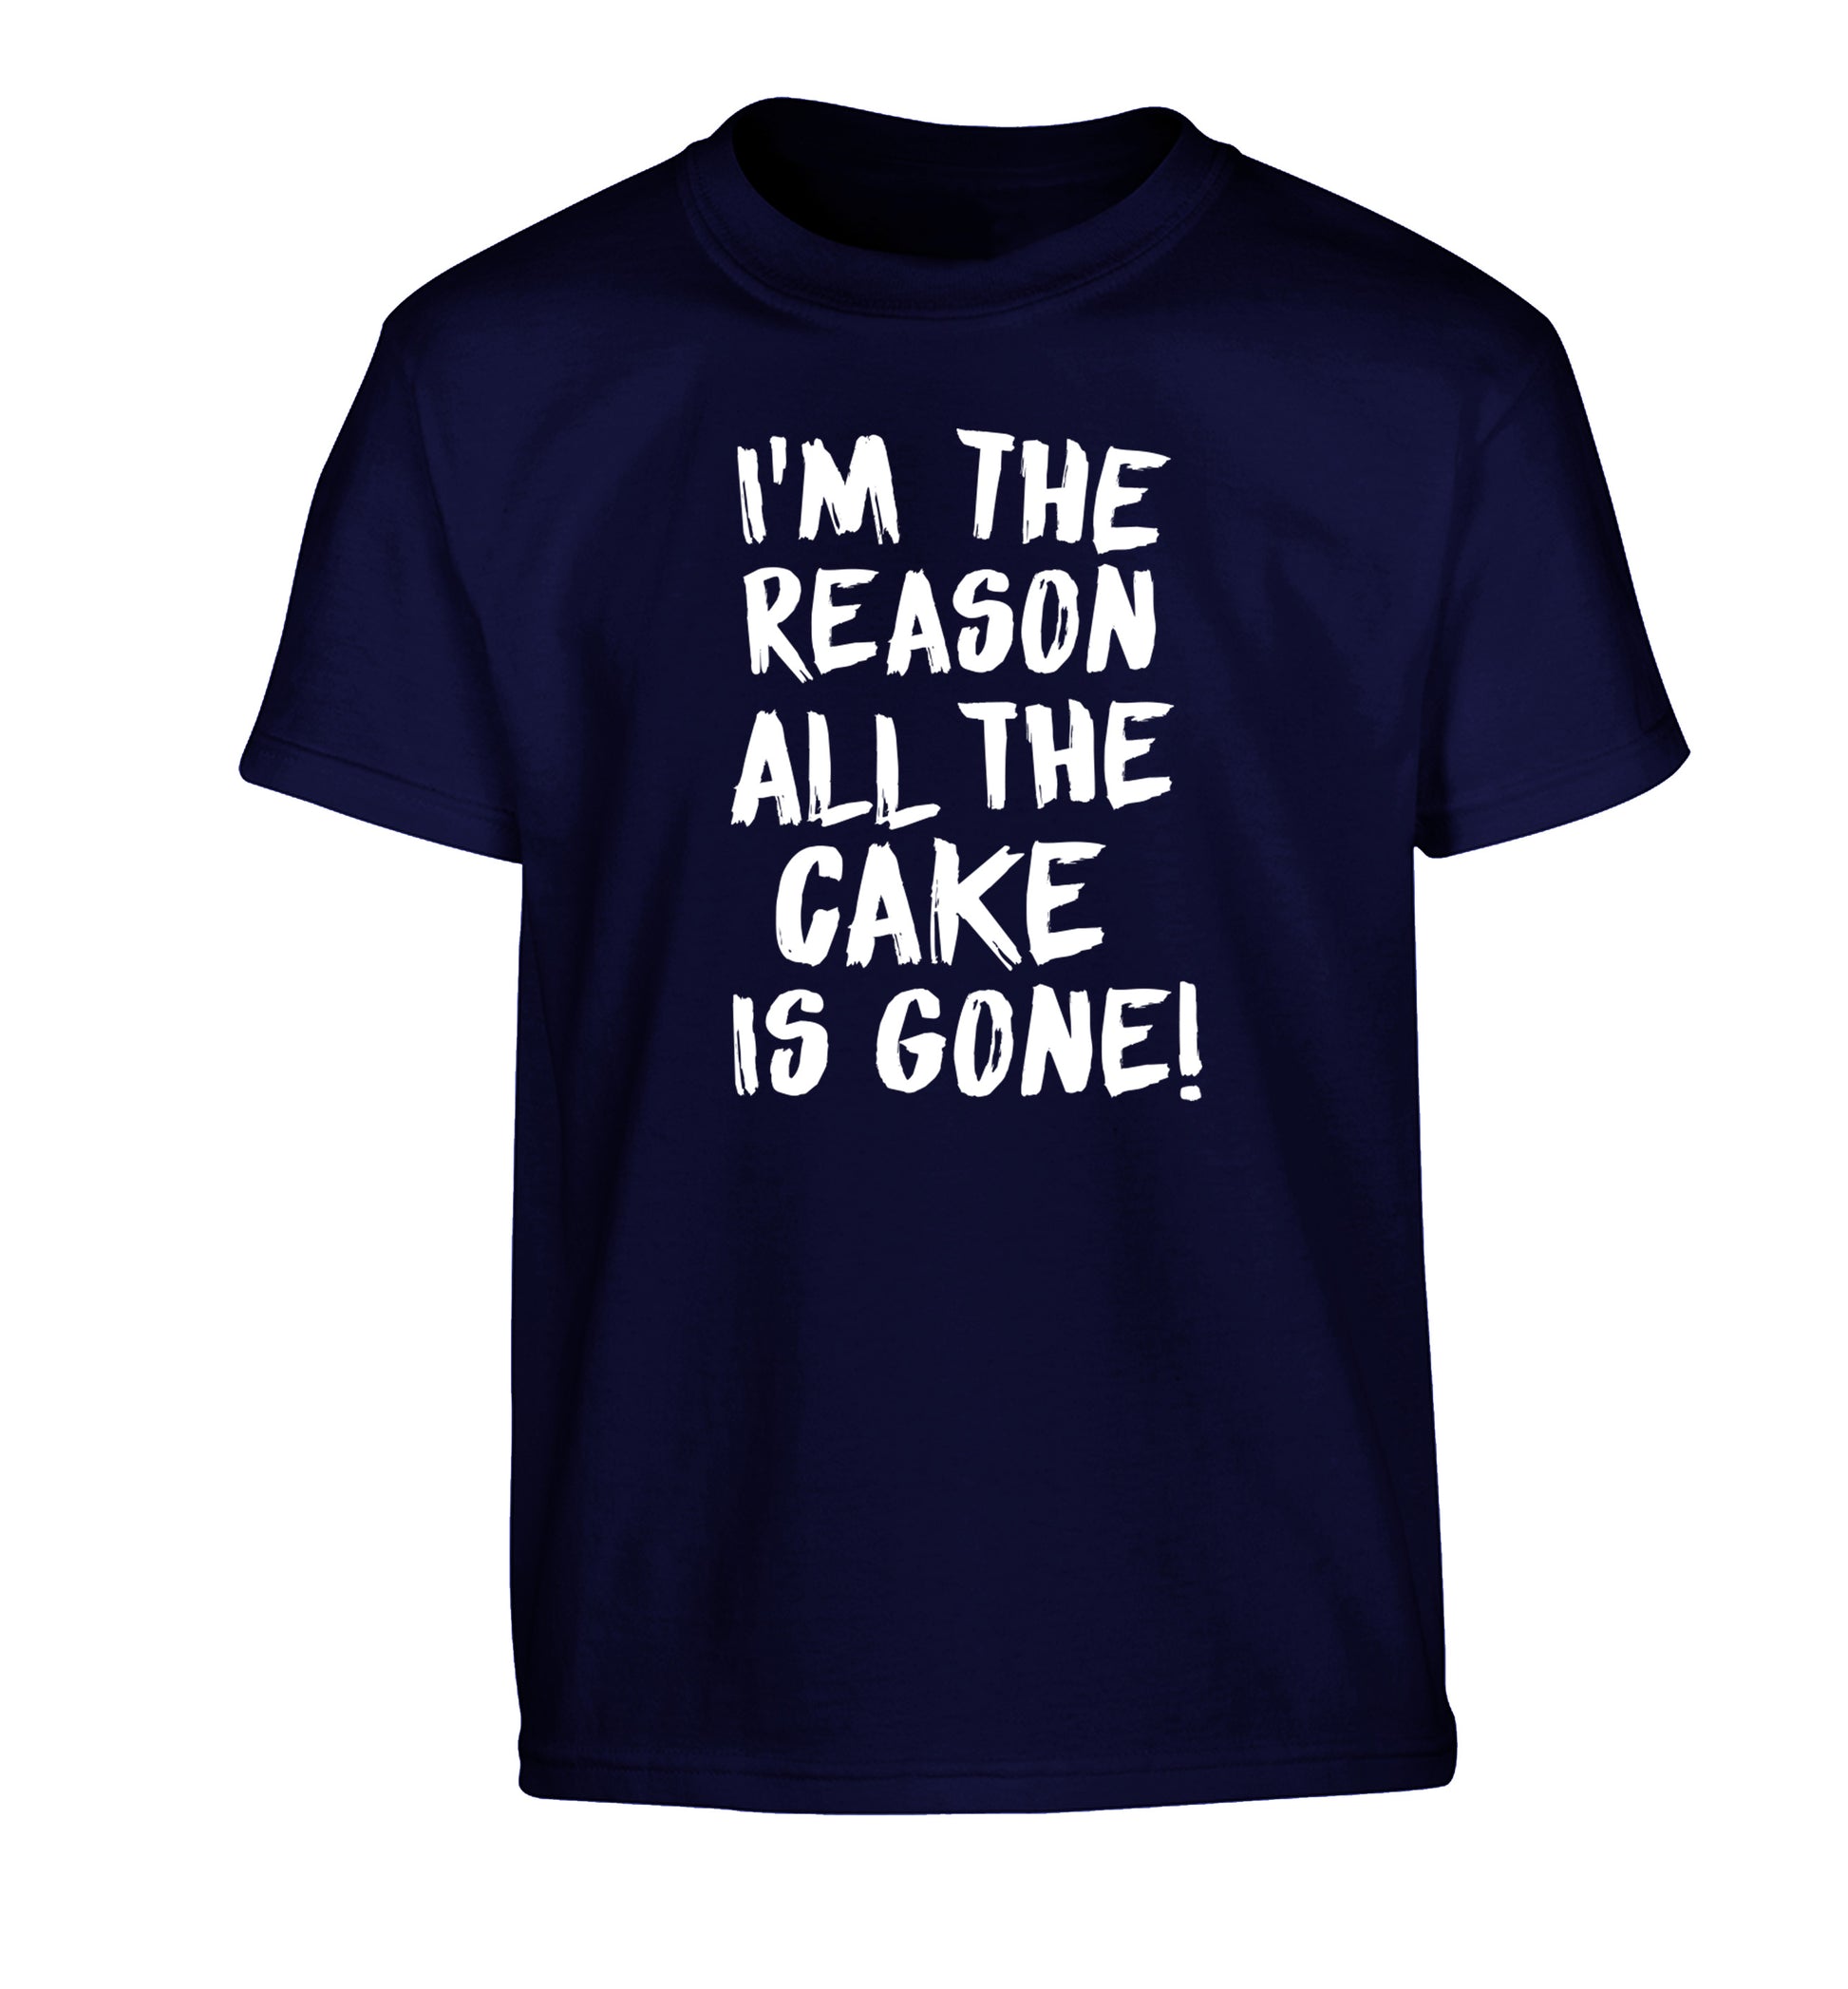 I'm the reason all the cake is gone Children's navy Tshirt 12-13 Years